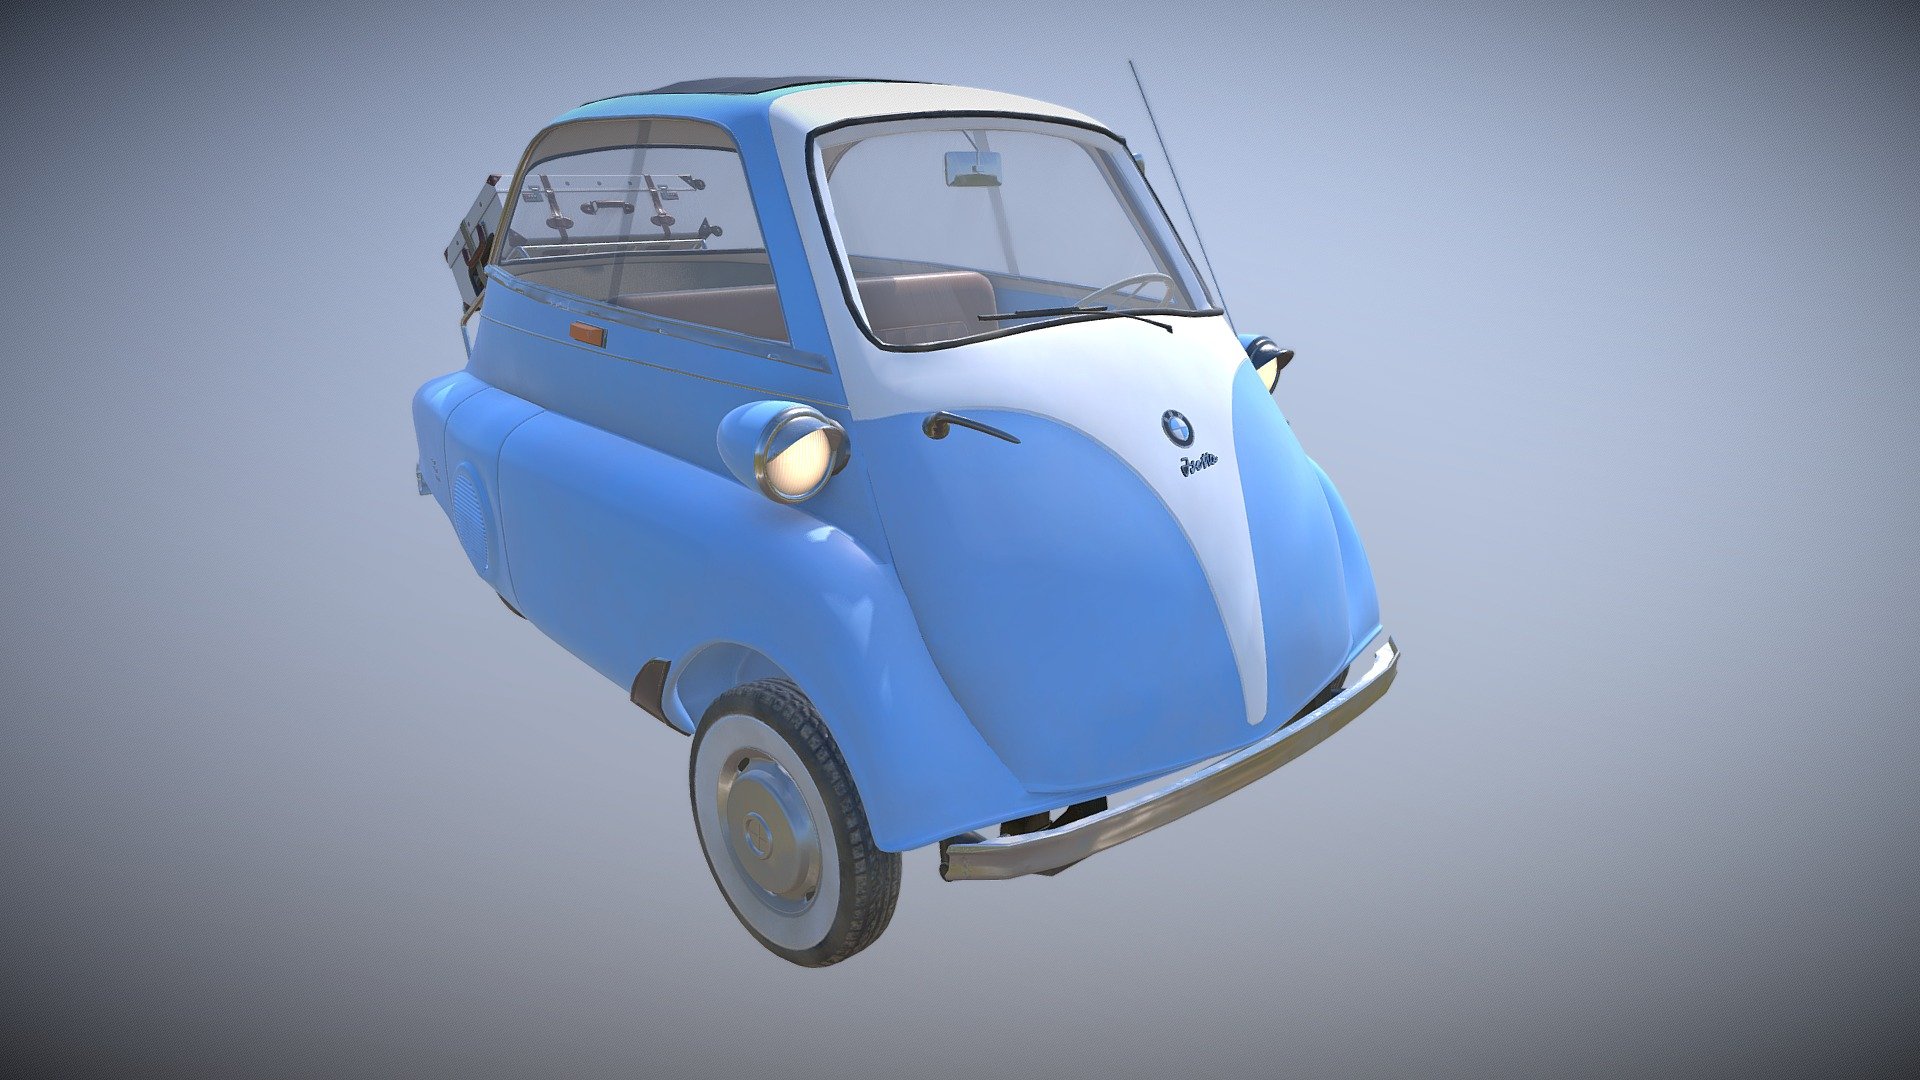 This is the car I built for the project. I uploaded it by itself so that it can be analyzed better. It was all made in maya and Substance 3d model